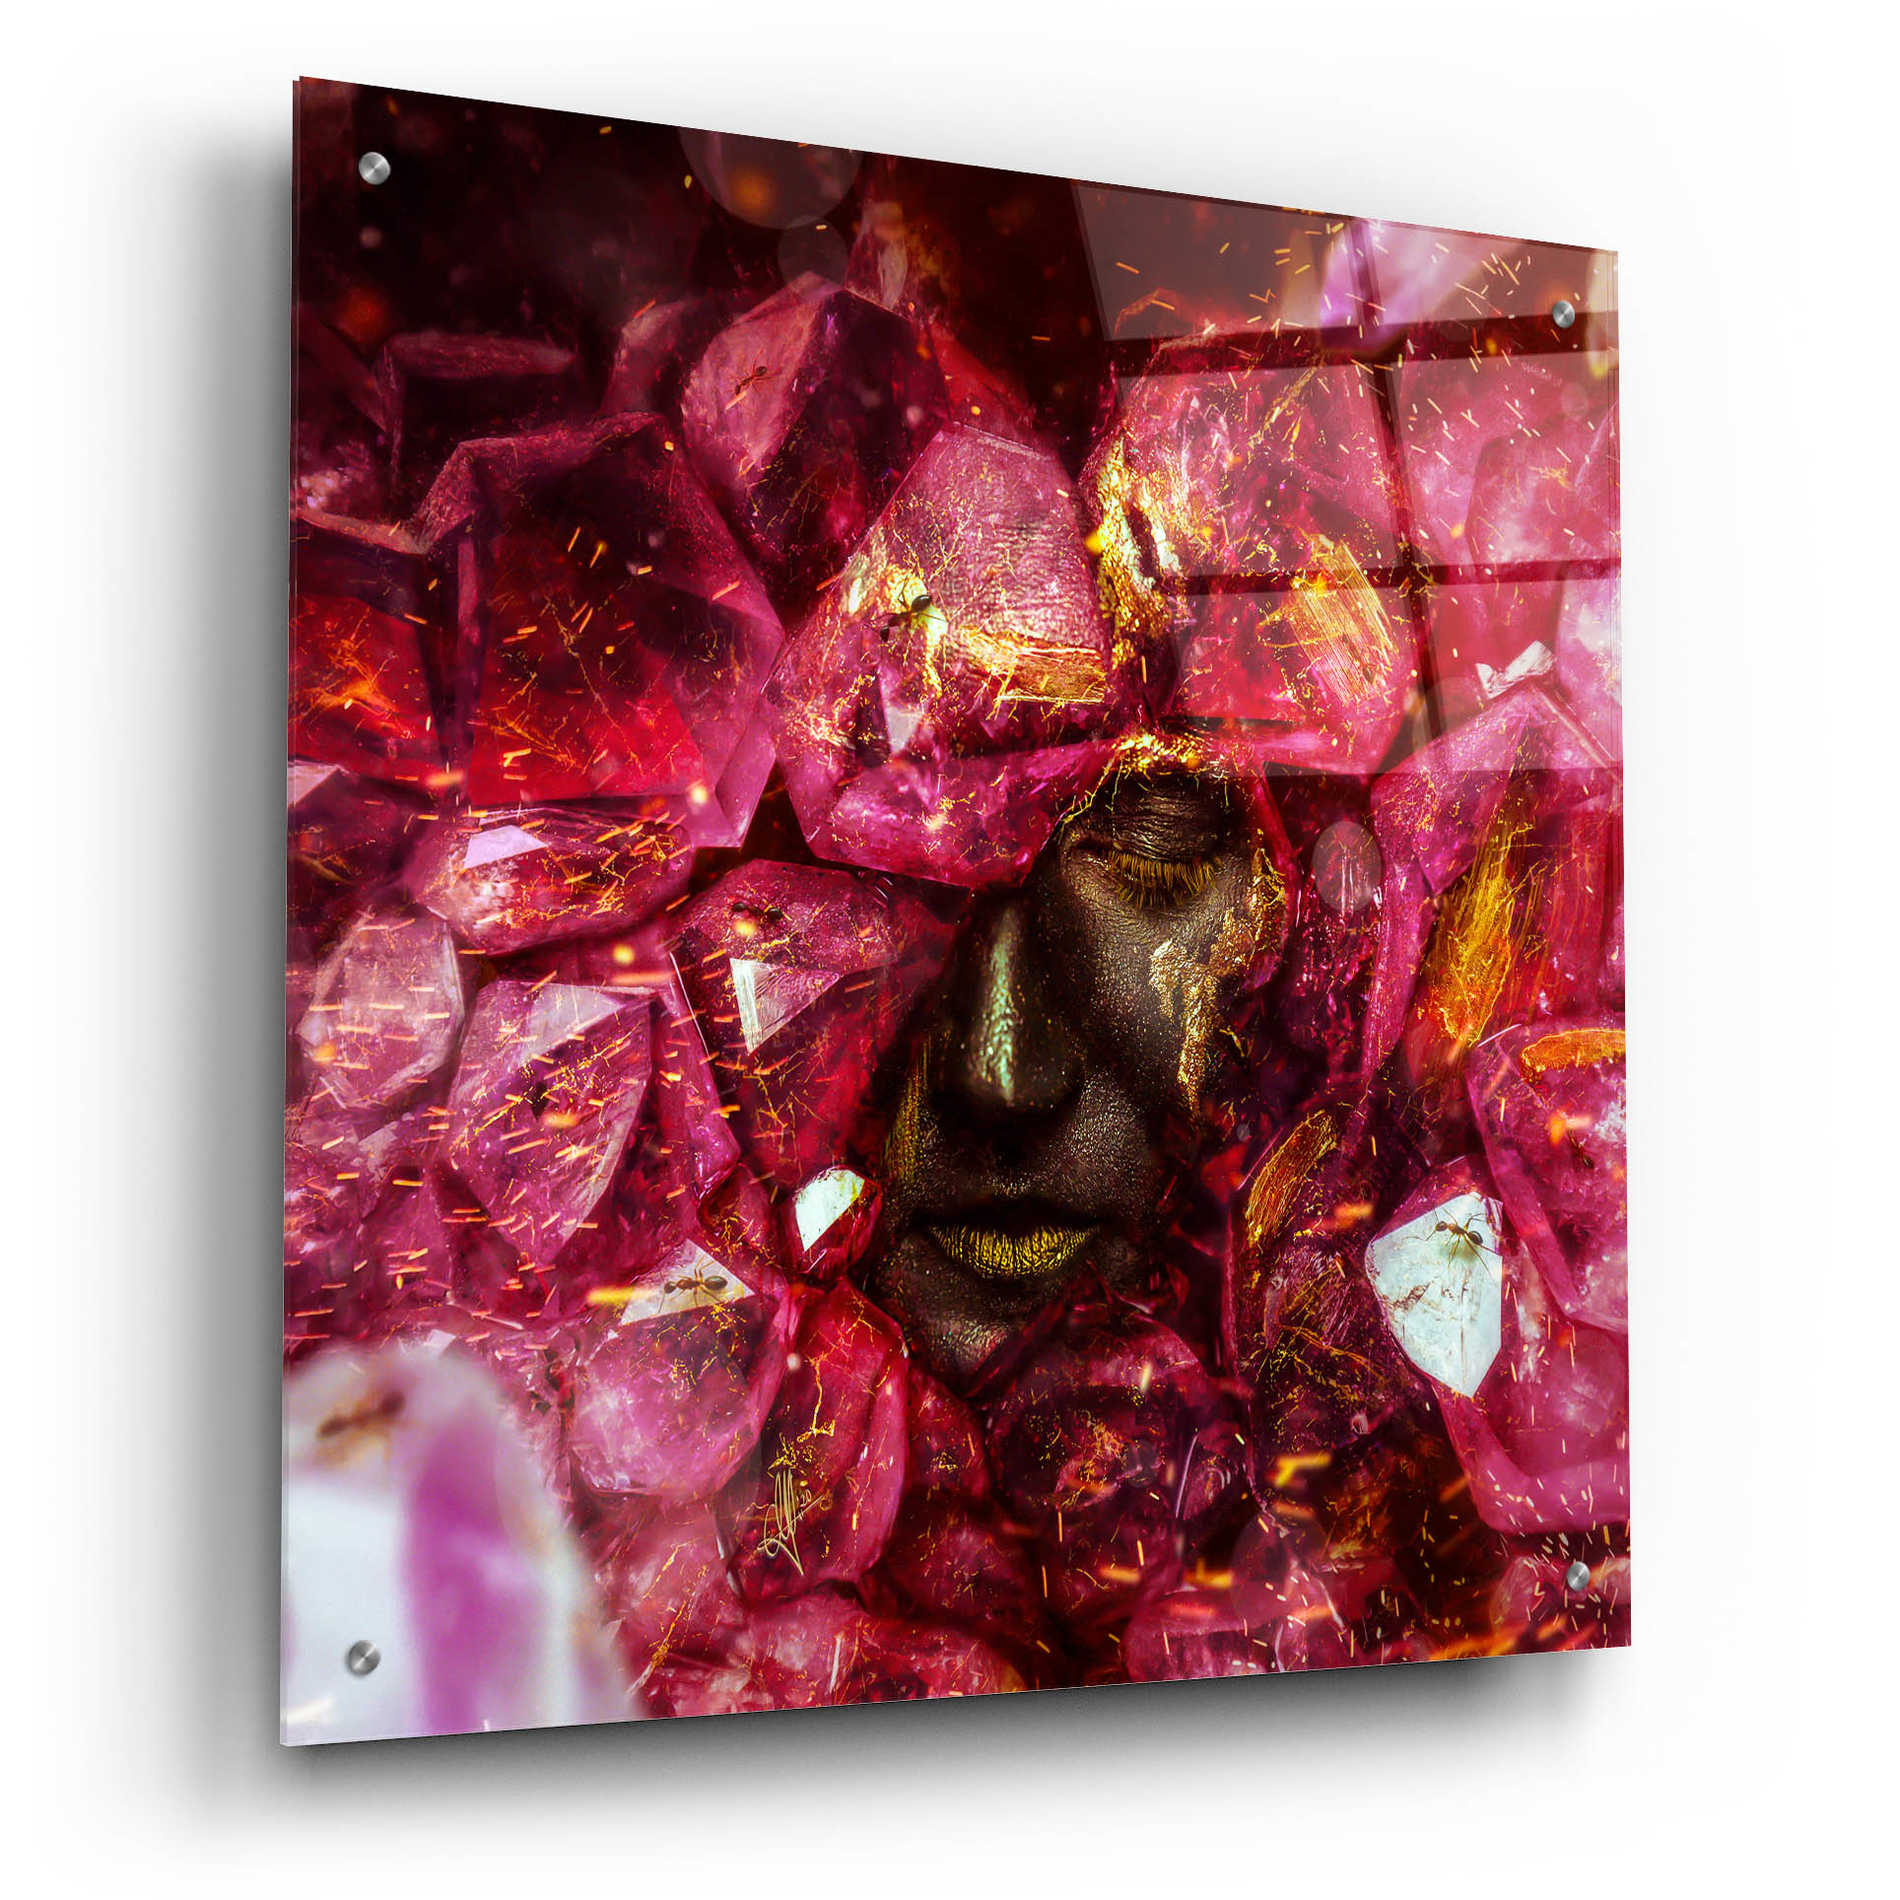 Epic Art 'States of the Matter - Crystallize' by Mario Sanchez Nevado, Acrylic Glass Wall Art,24x24